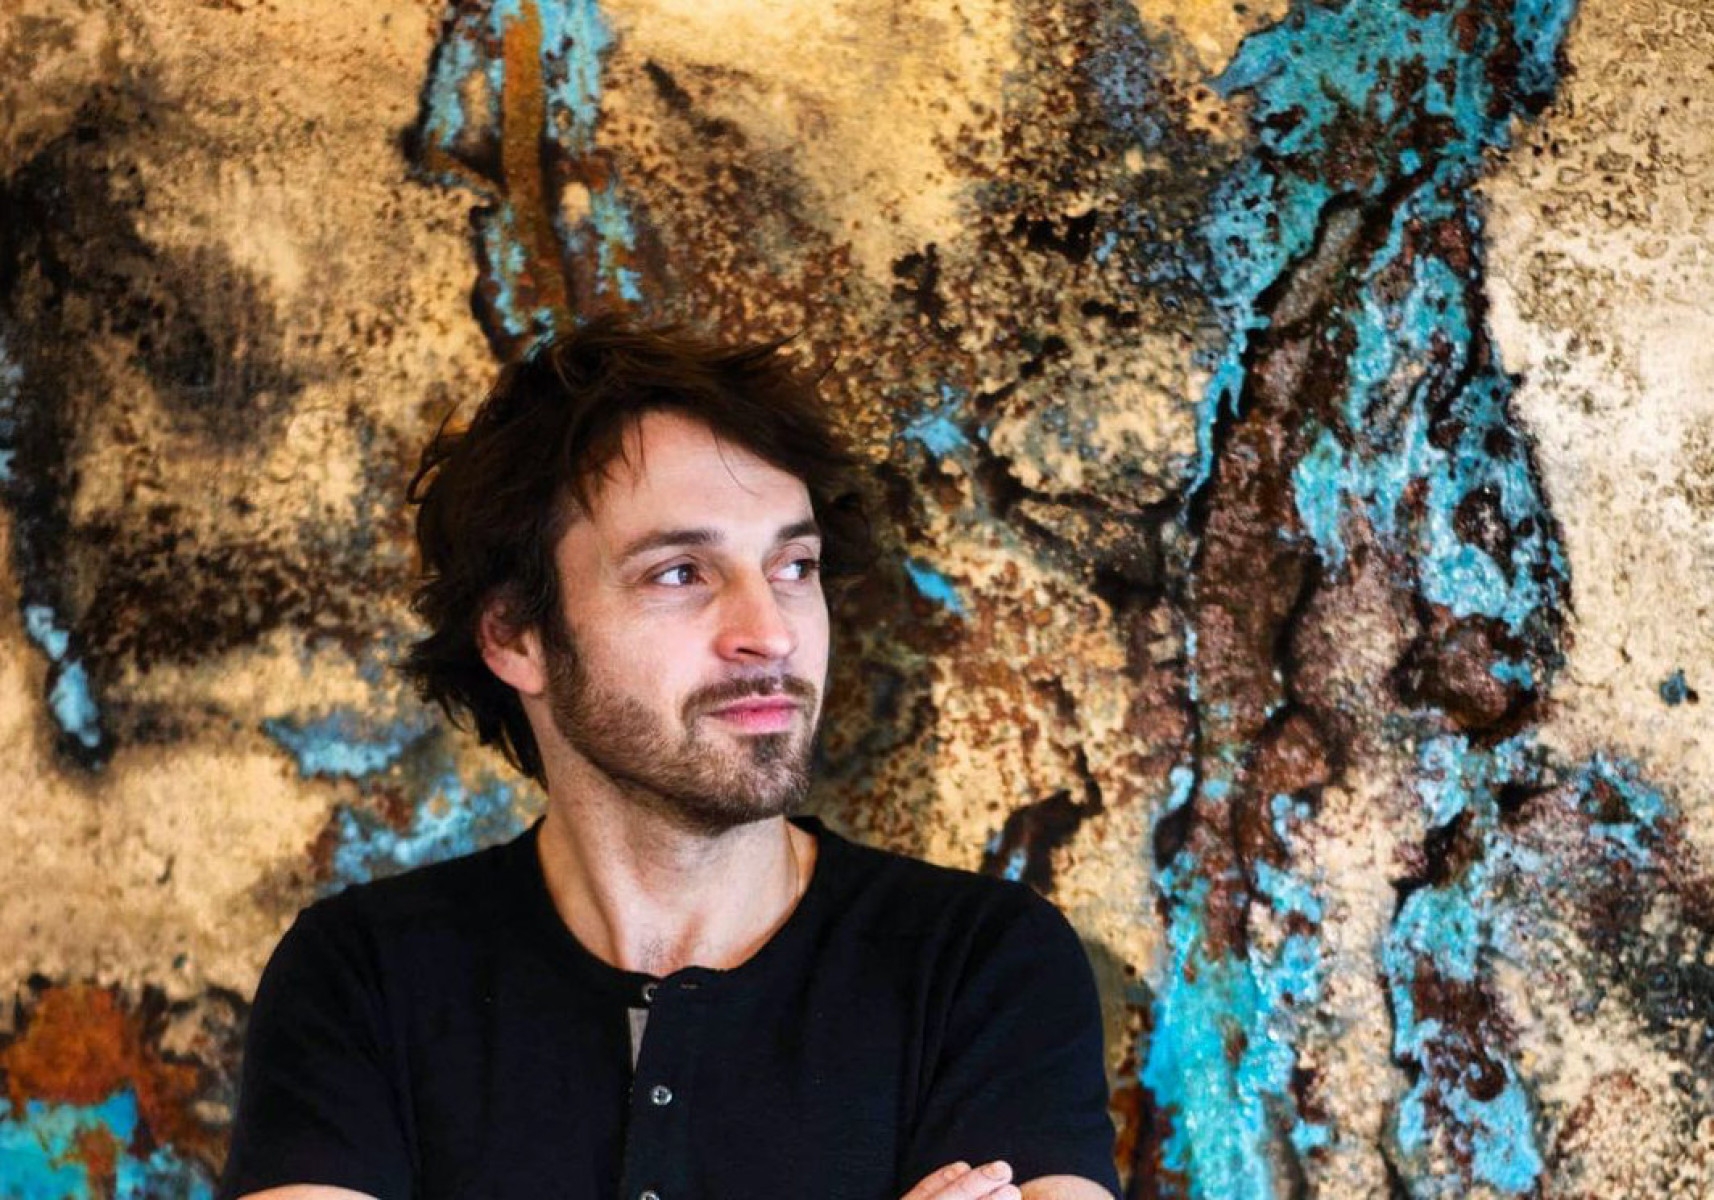 Lionel Sabatté, winner of the 2020 Luxembourg Art Prize 